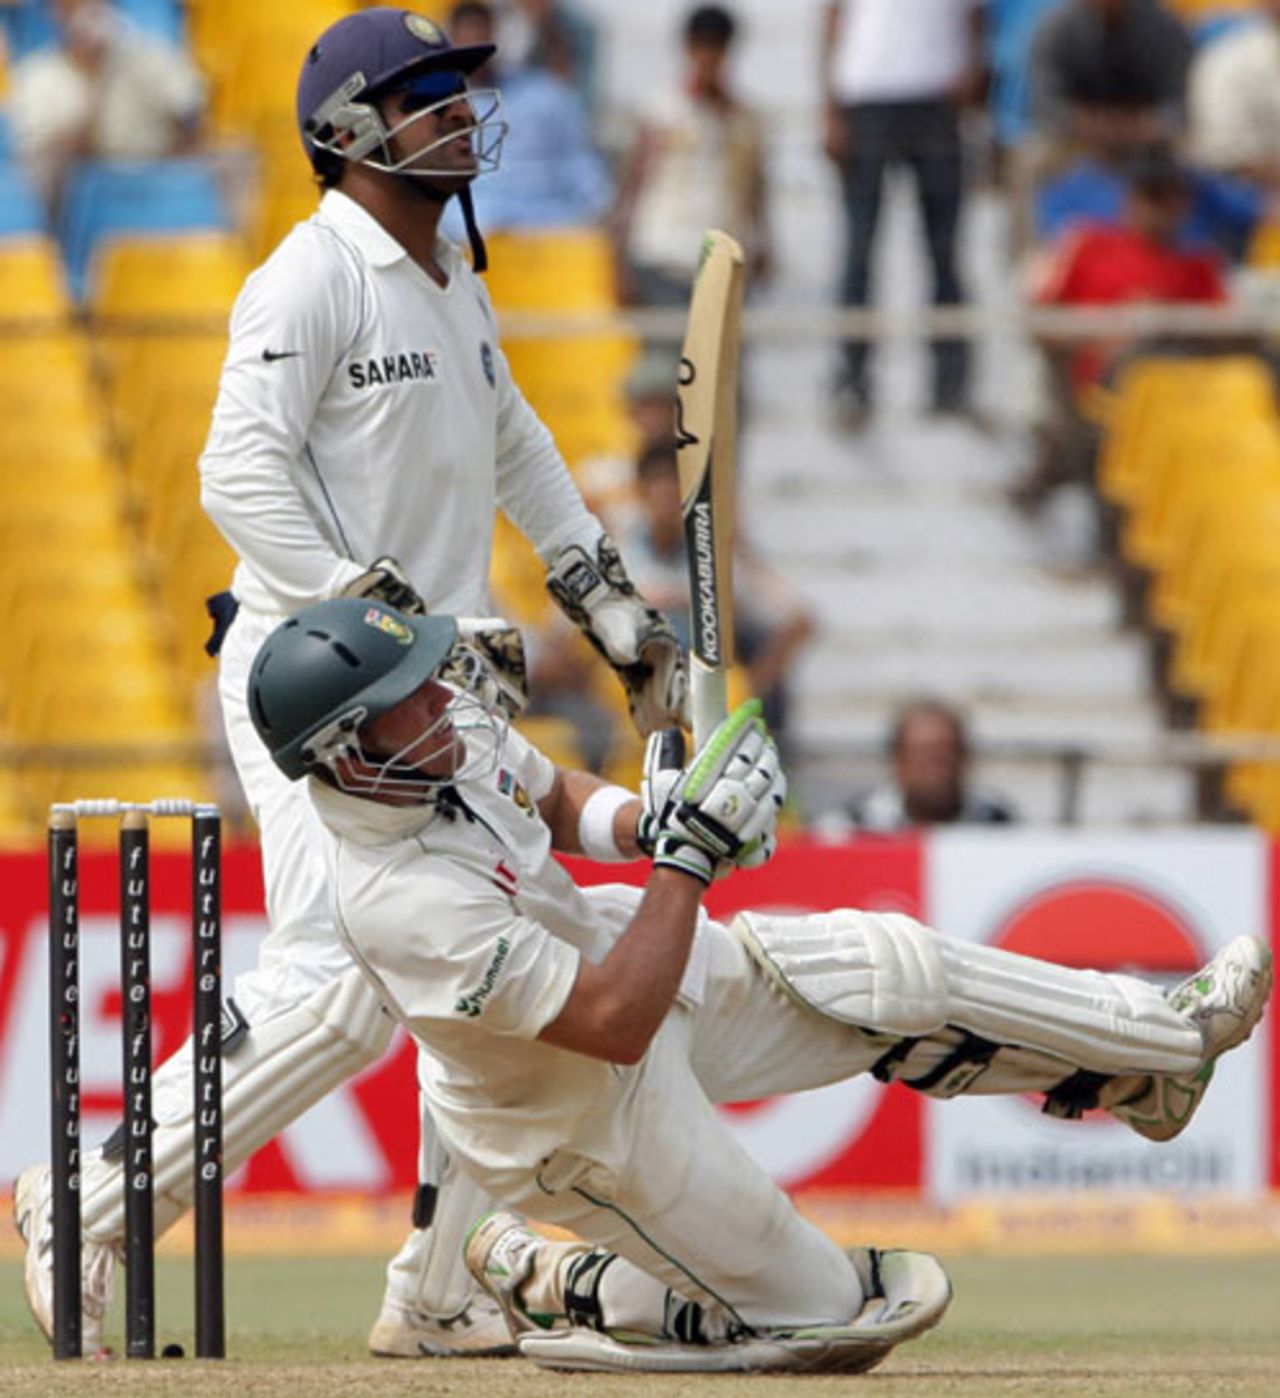 AB de Villiers falls over as he clobbers a massive six, India v South Africa, 2nd Test, Ahmedabad, 2nd day, April 4, 2008